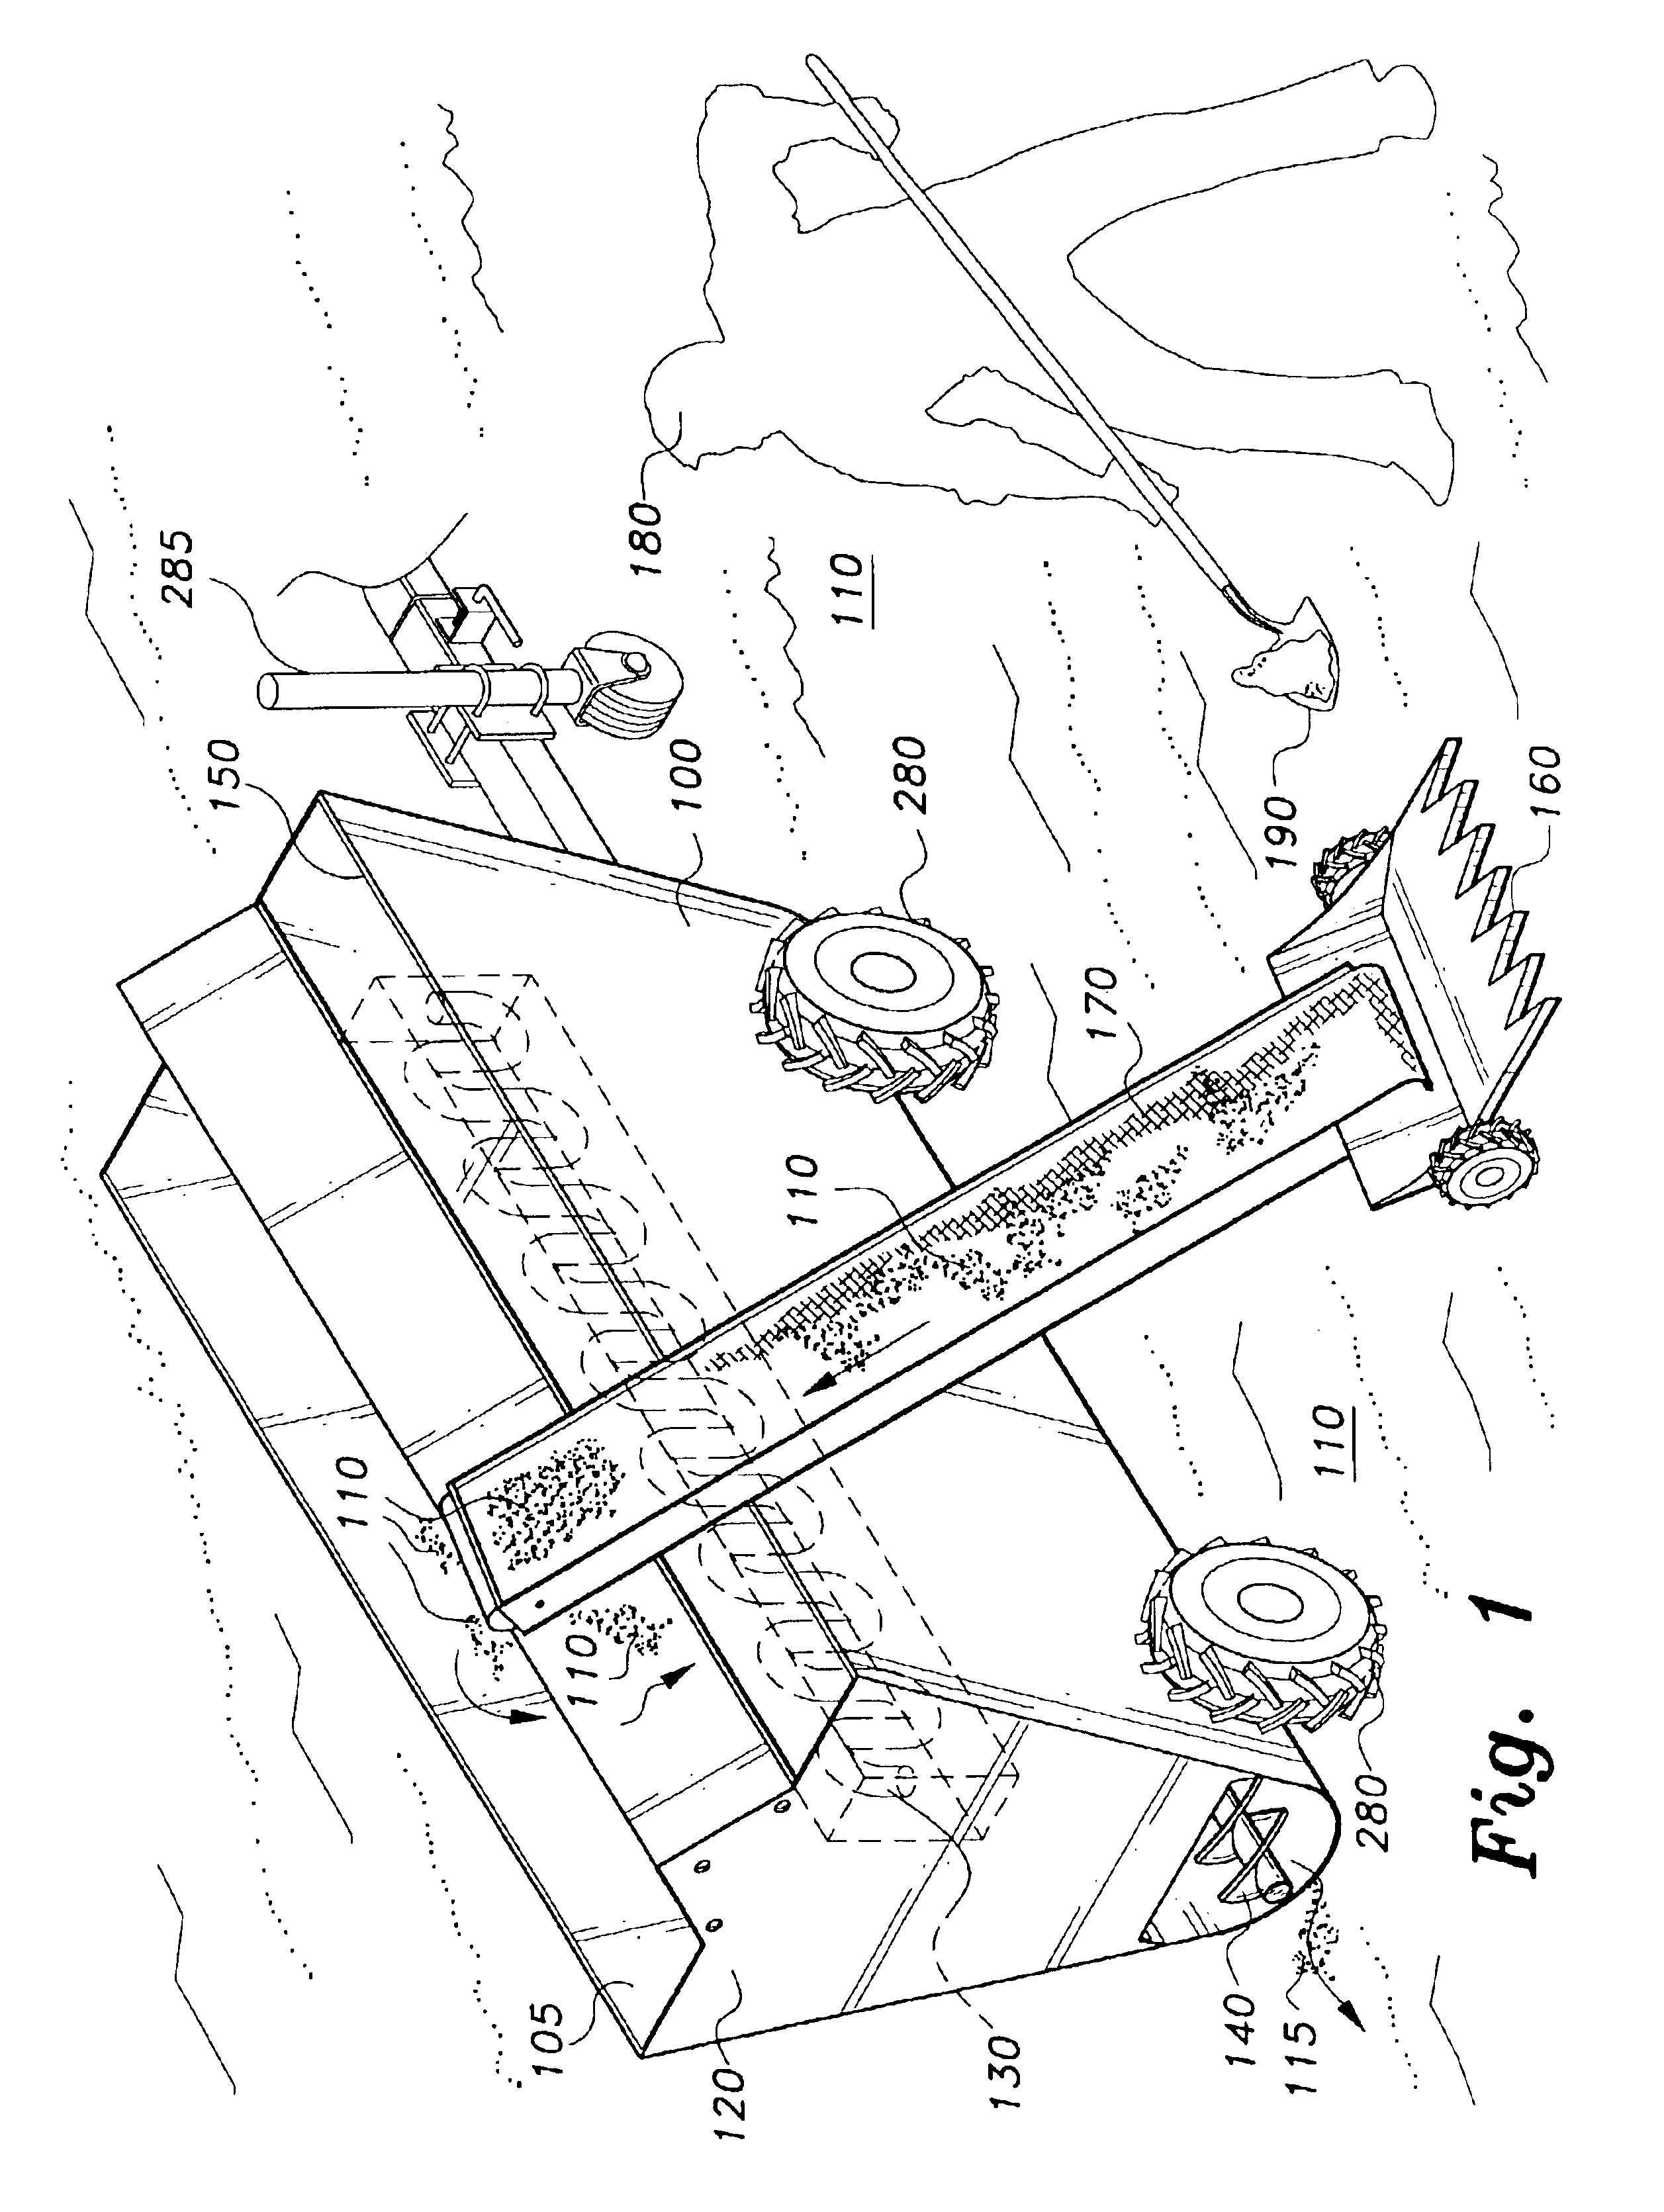 Apparatus and method for treating top soil